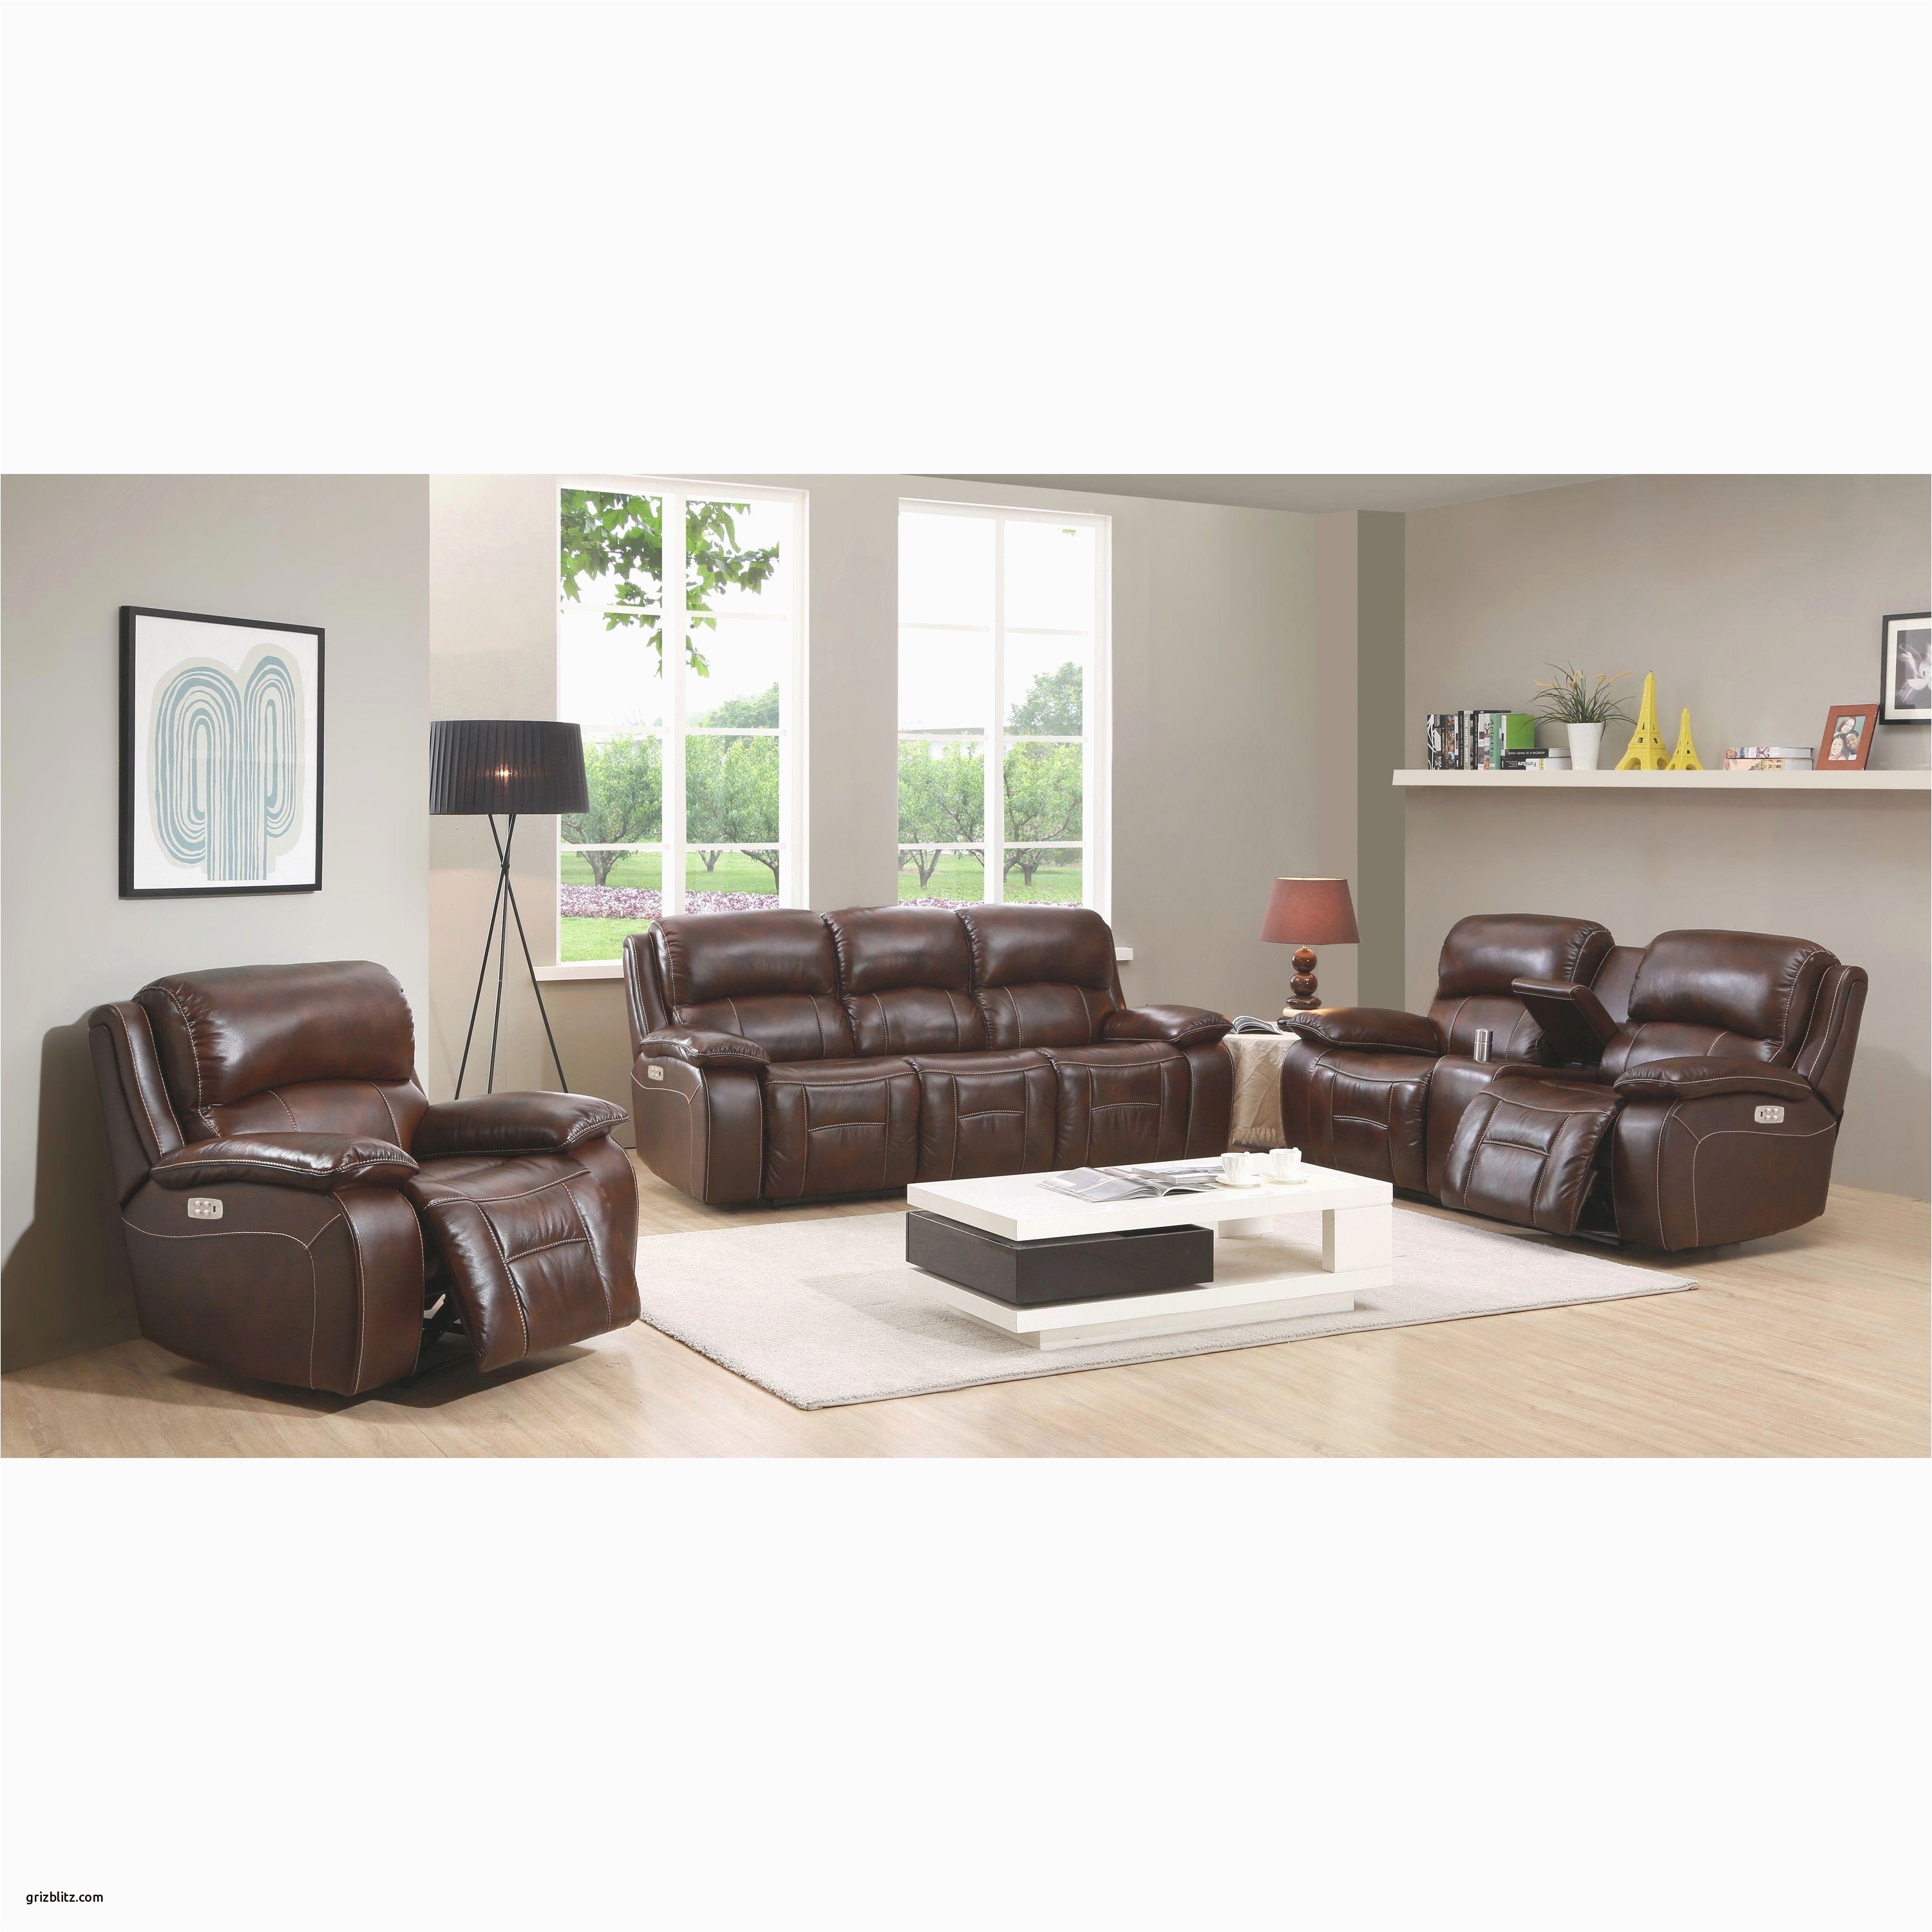 Best Place to Buy Leather sofa Online 50 Fresh Cheap White Leather sofa Pics 50 Photos Home Improvement